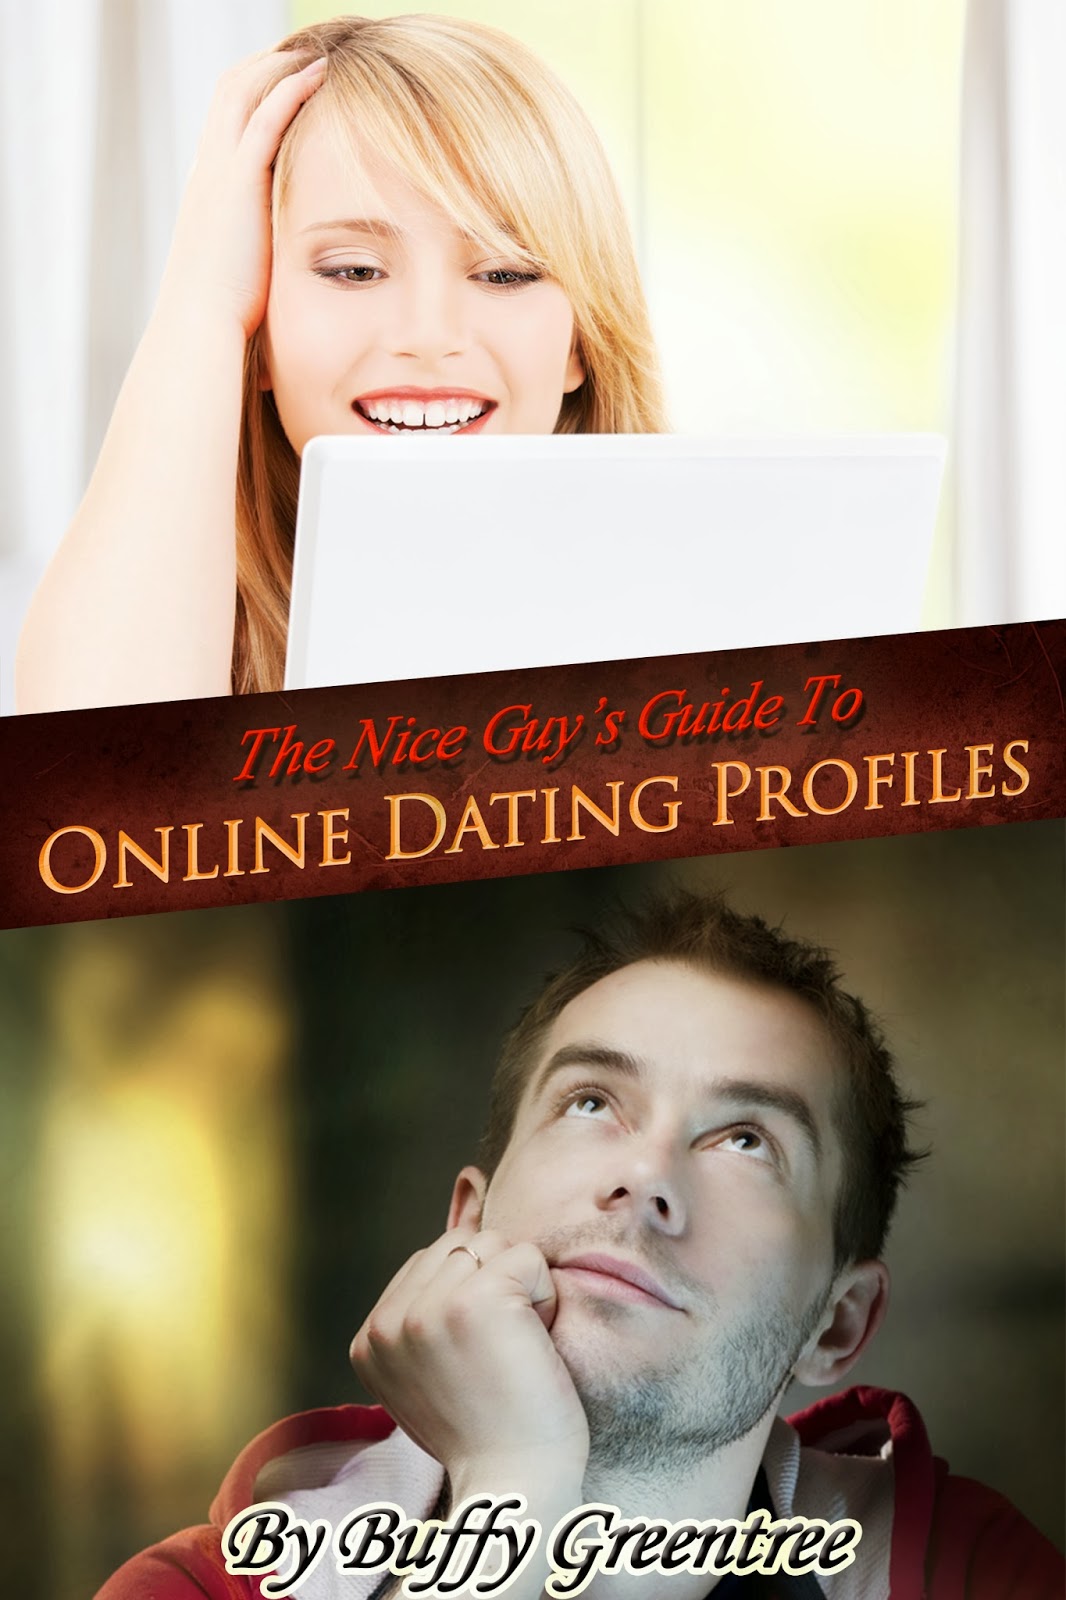 http://www.amazon.com/Nice-Guide-Online-Dating-Profiles-ebook/dp/B00GS1GE9G/